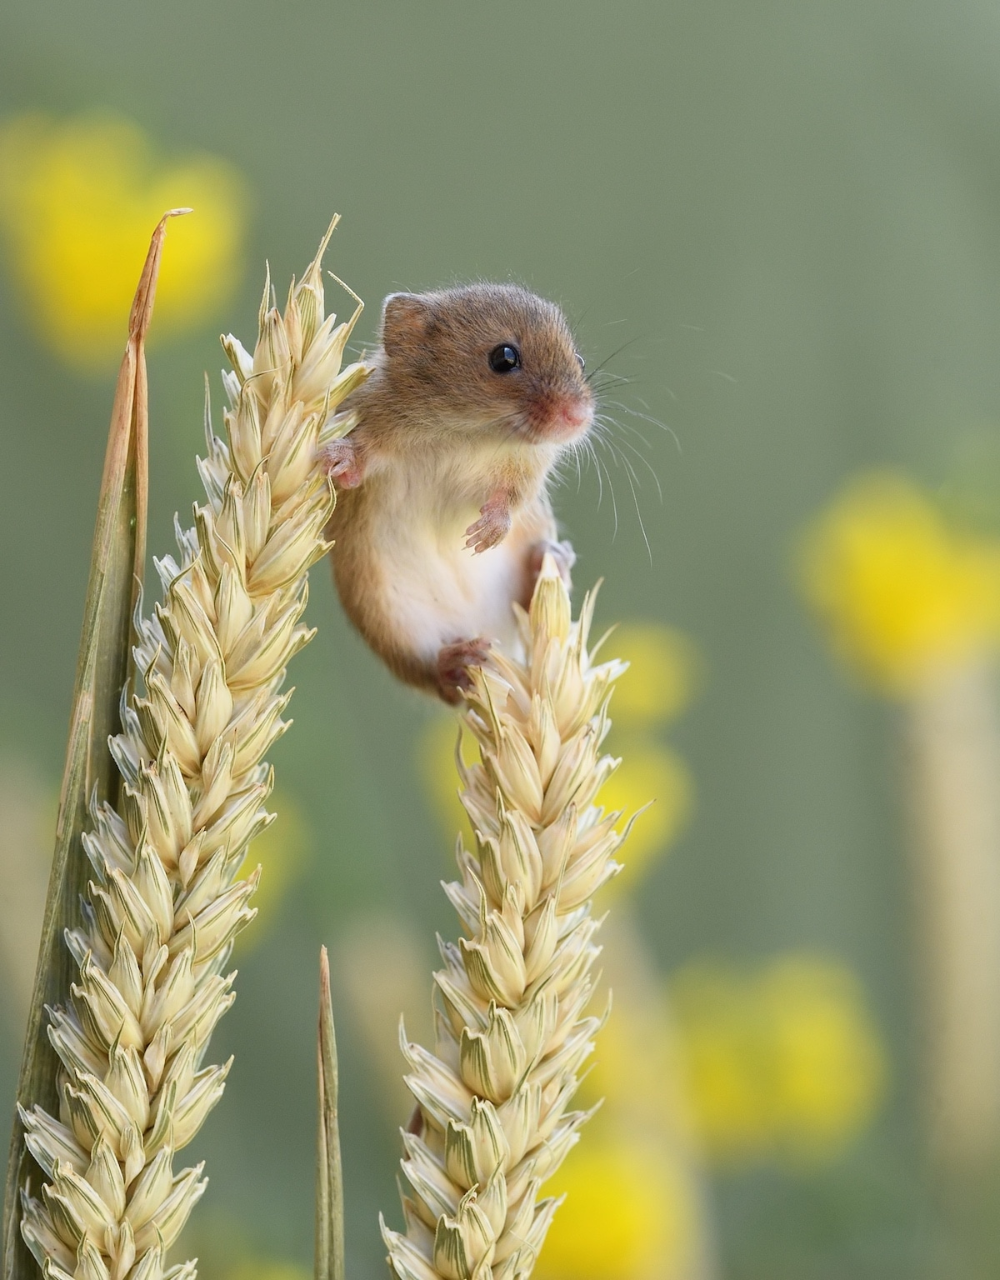 Adorable Photos of Tiny Harvest Mice Joyfully Playing in Nature -   16 plants Photography animals ideas